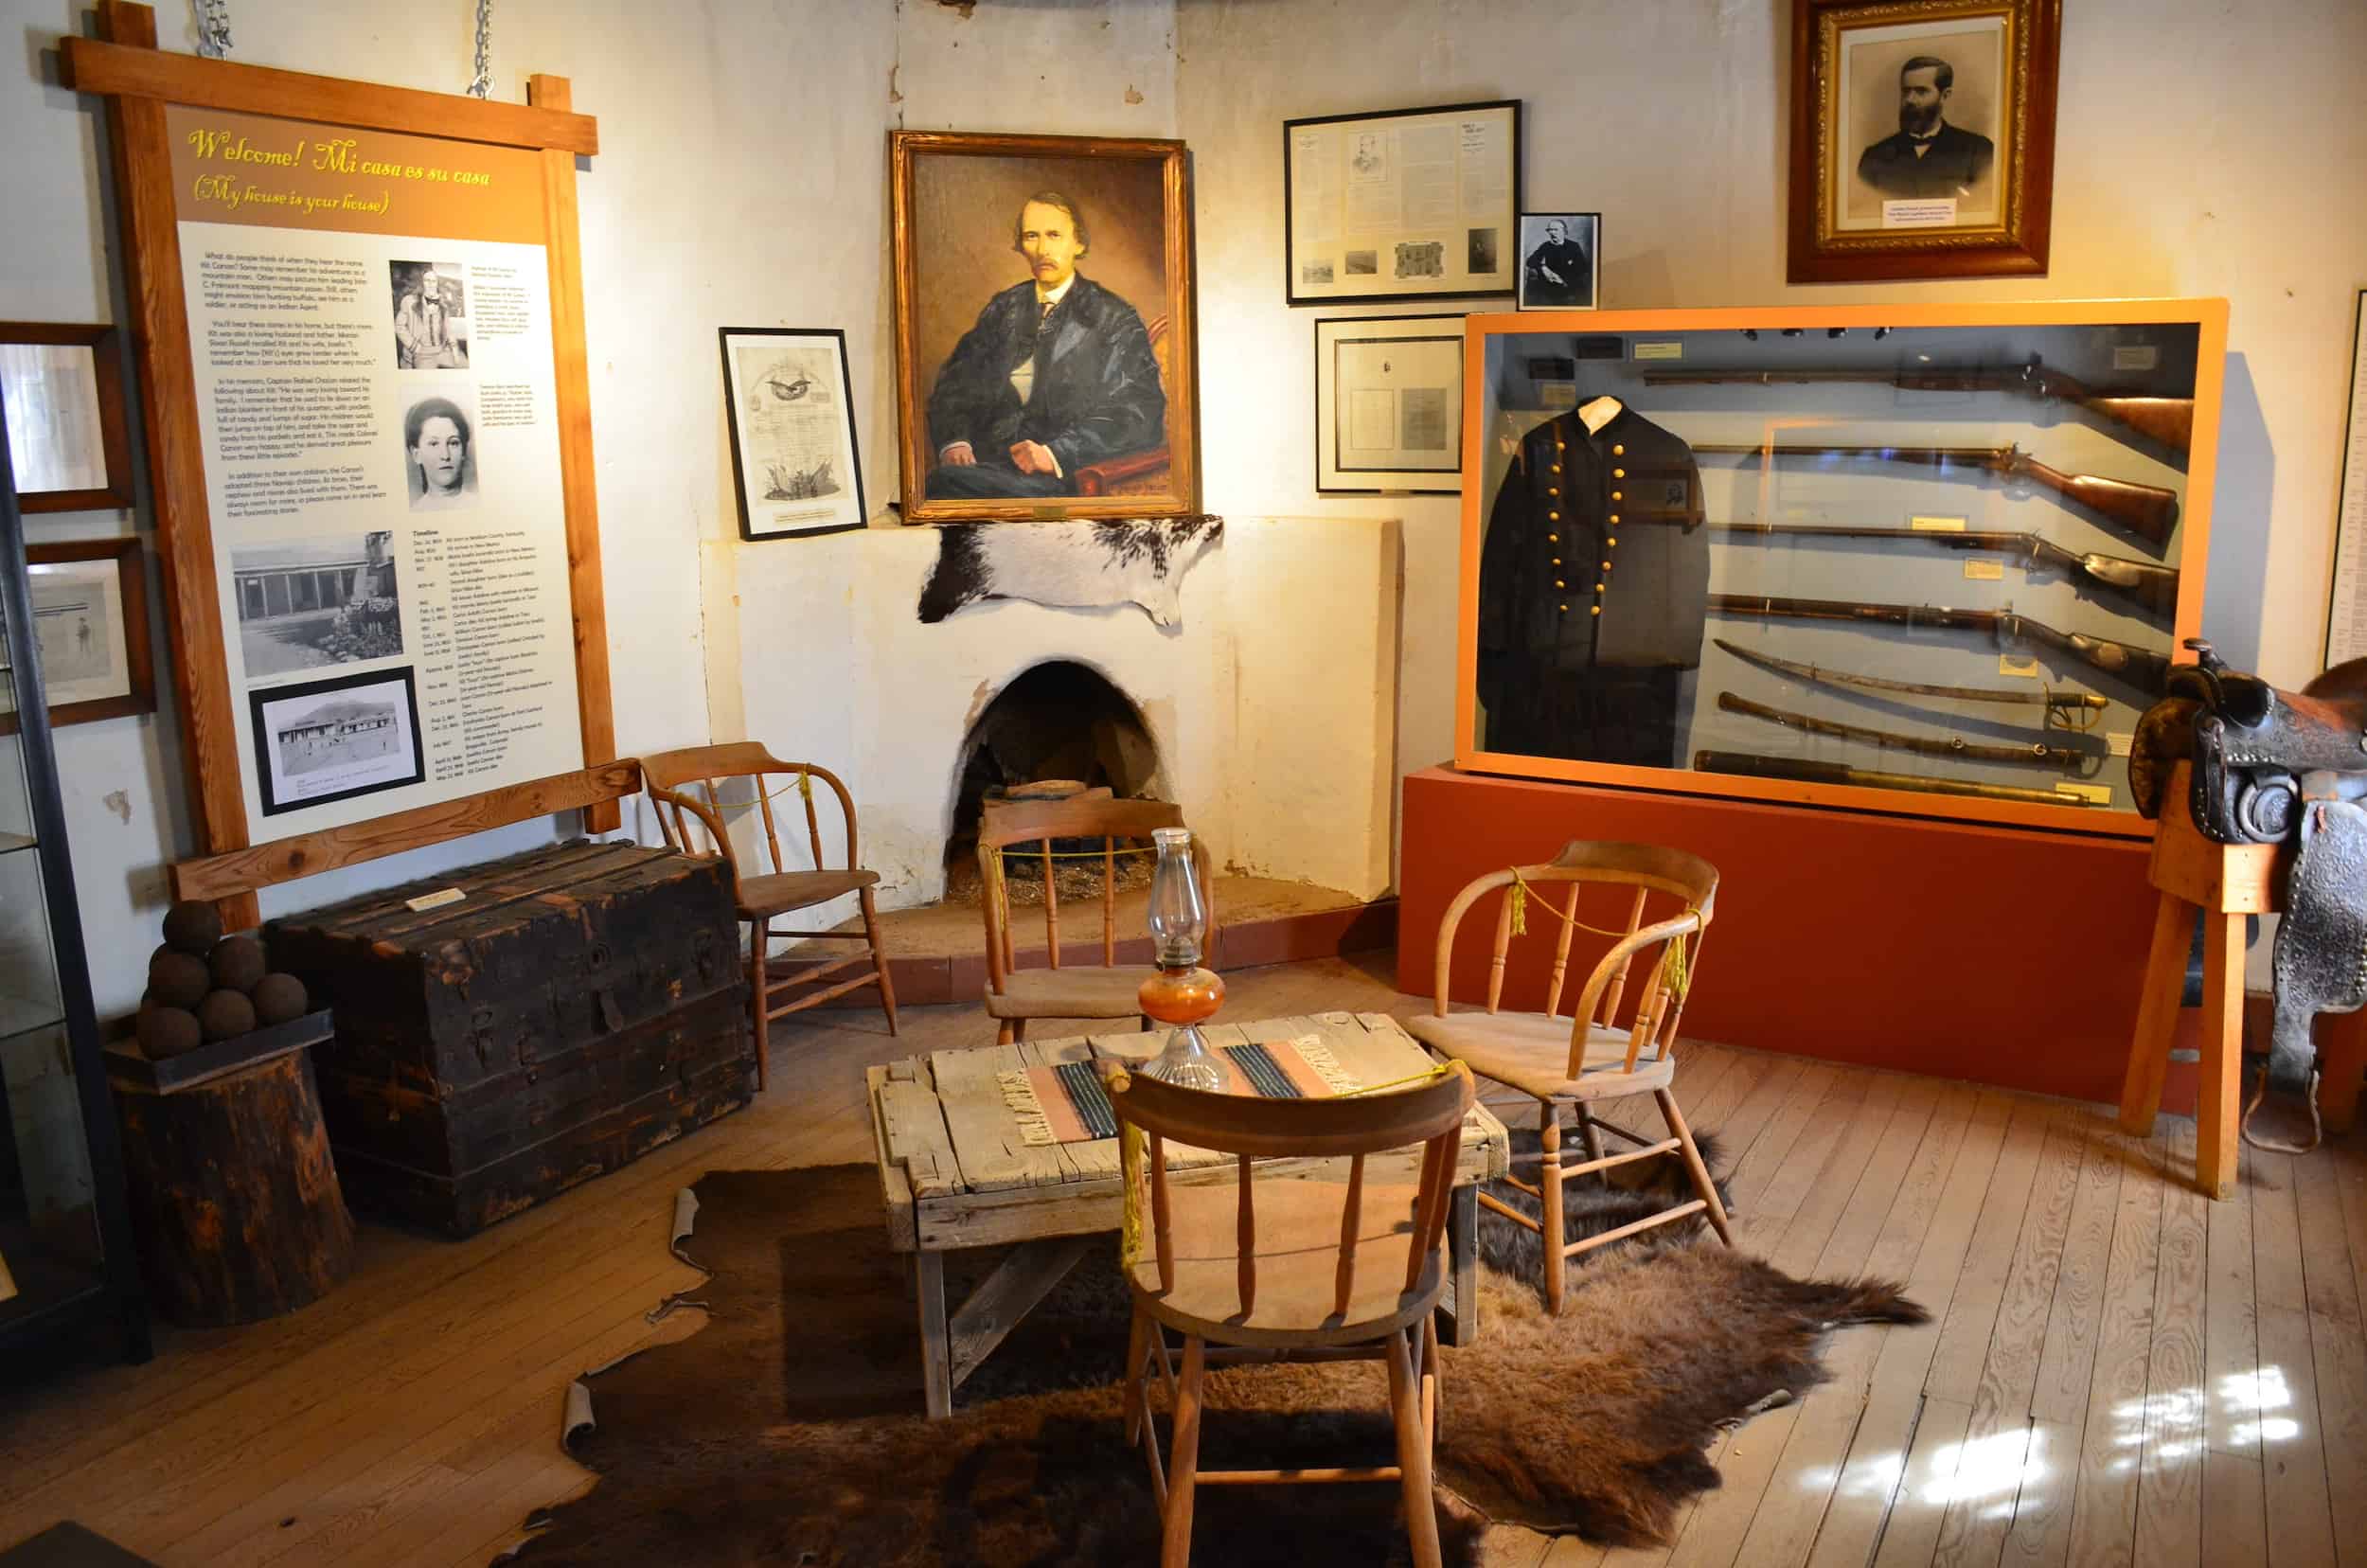 Personal items belonging to Kit Carson